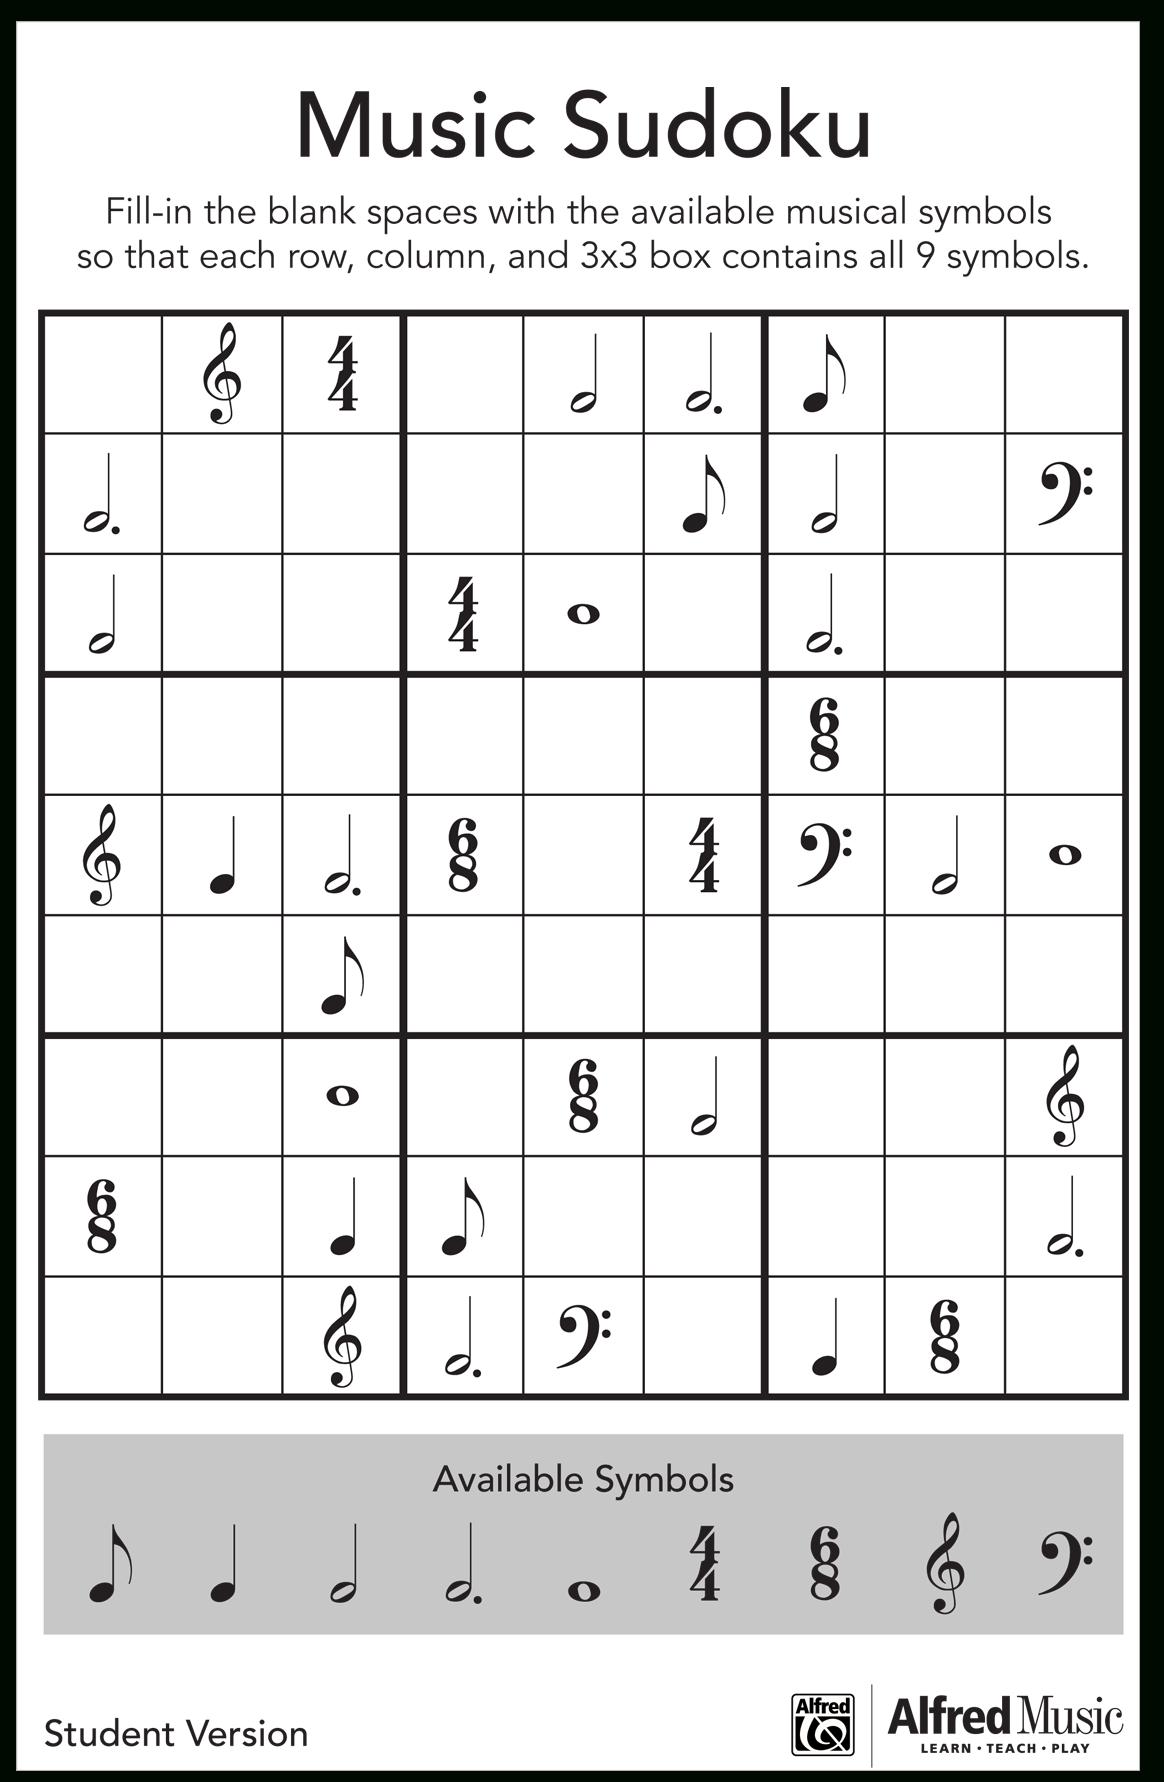 Music Sudoku Activity For Students | Student Activities concernant Sudoku Grande Section